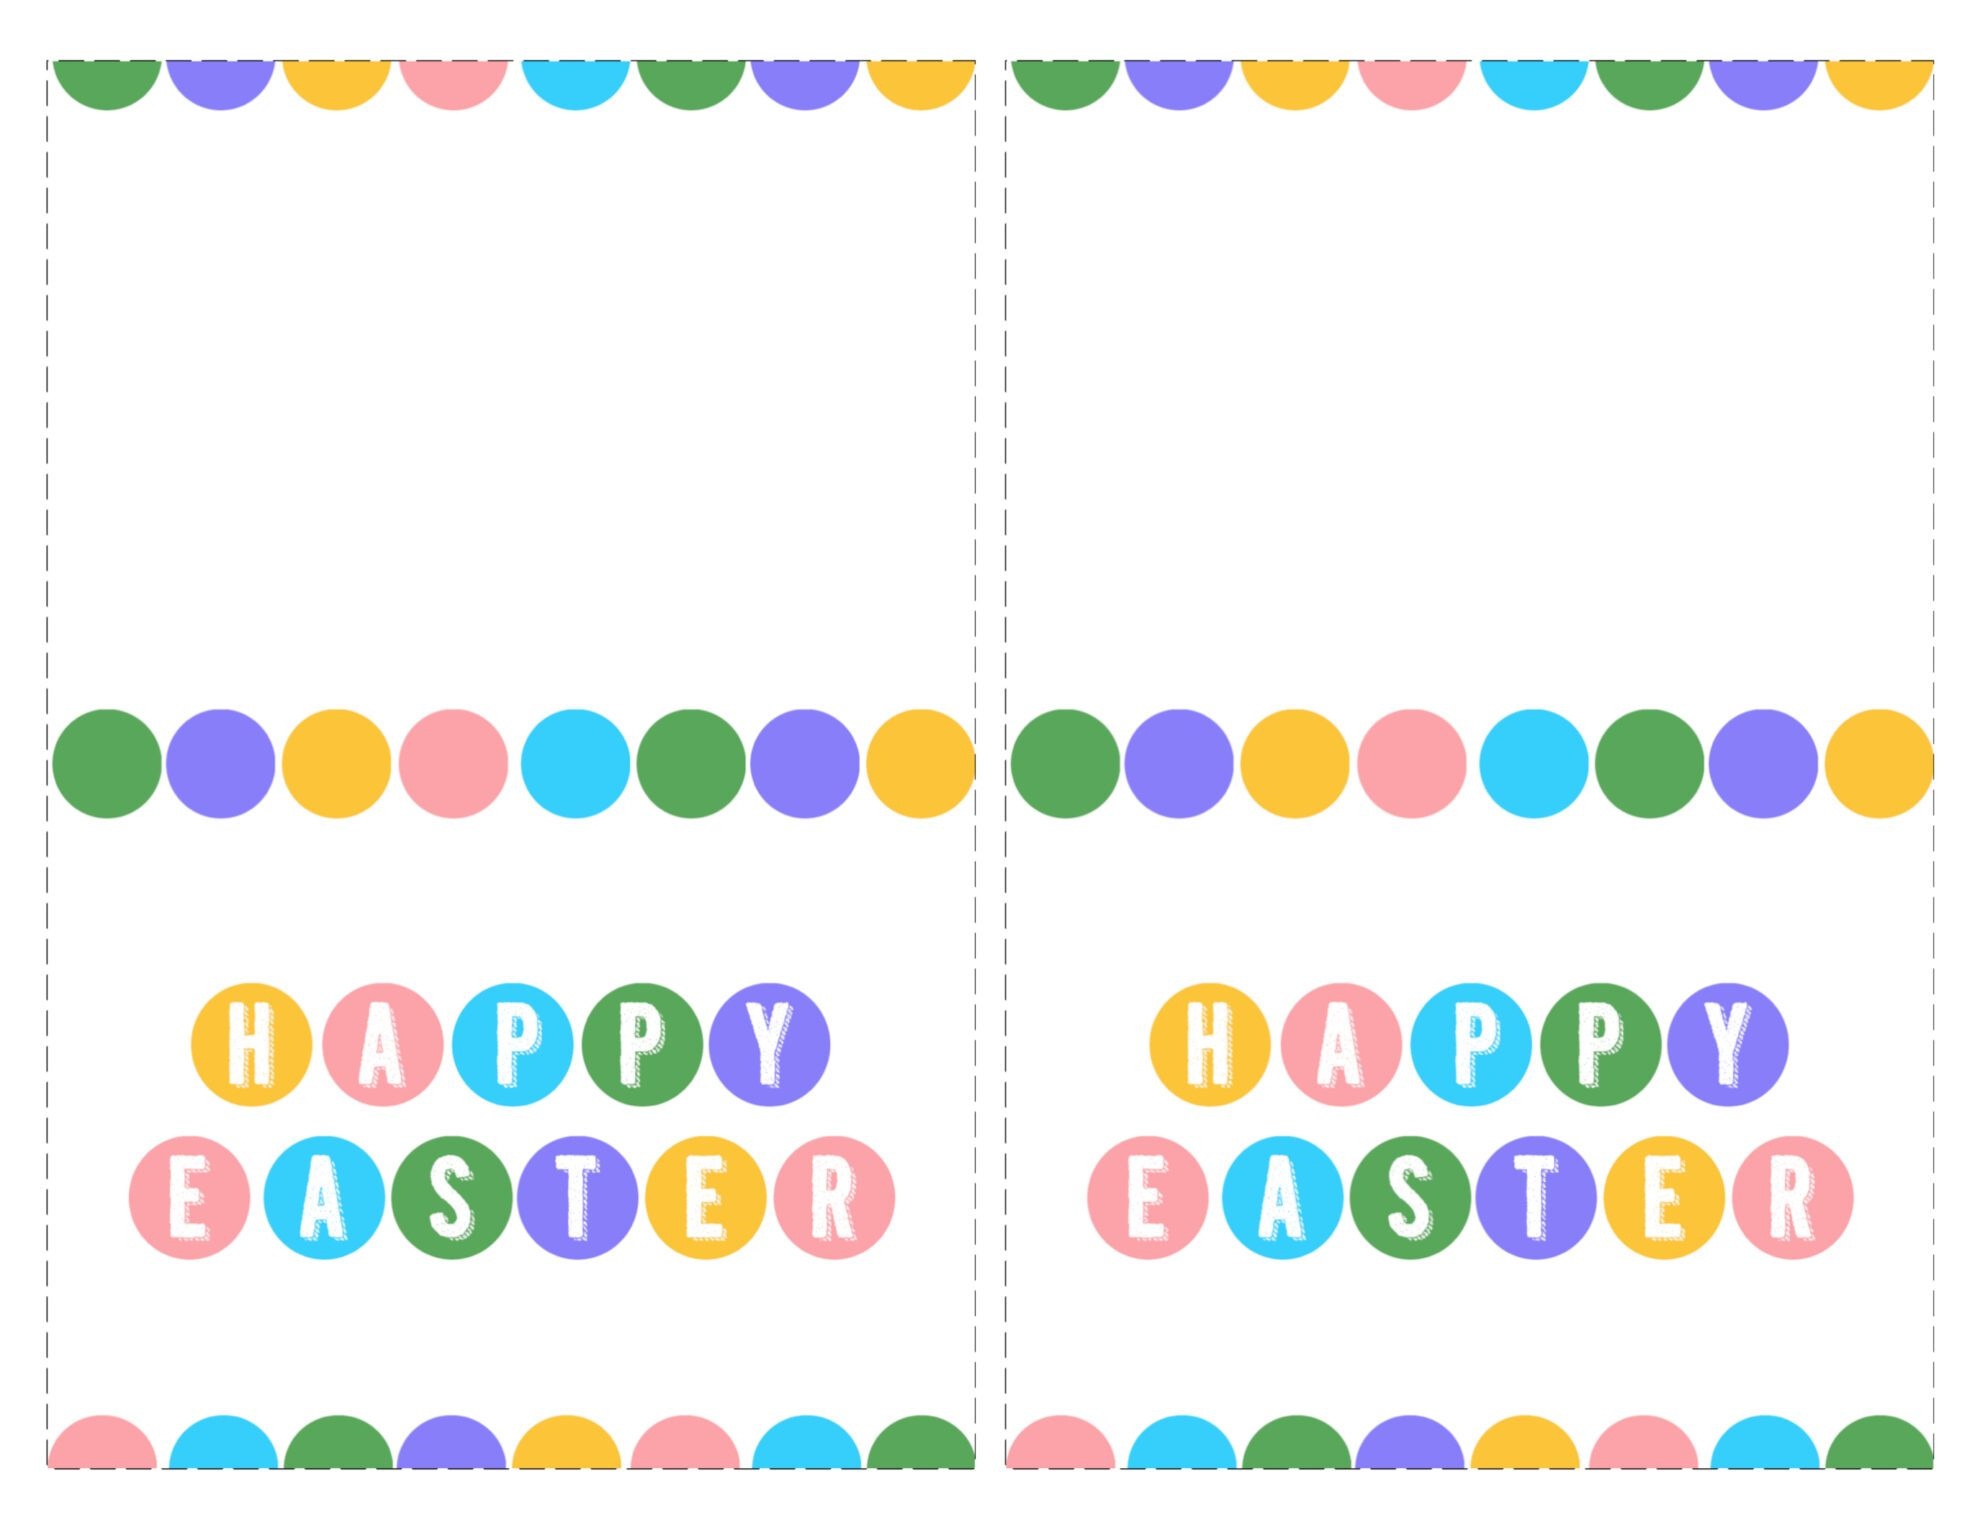 Happy Easter Cards Printable - Free - Paper Trail Design - Free Printable Easter Cards